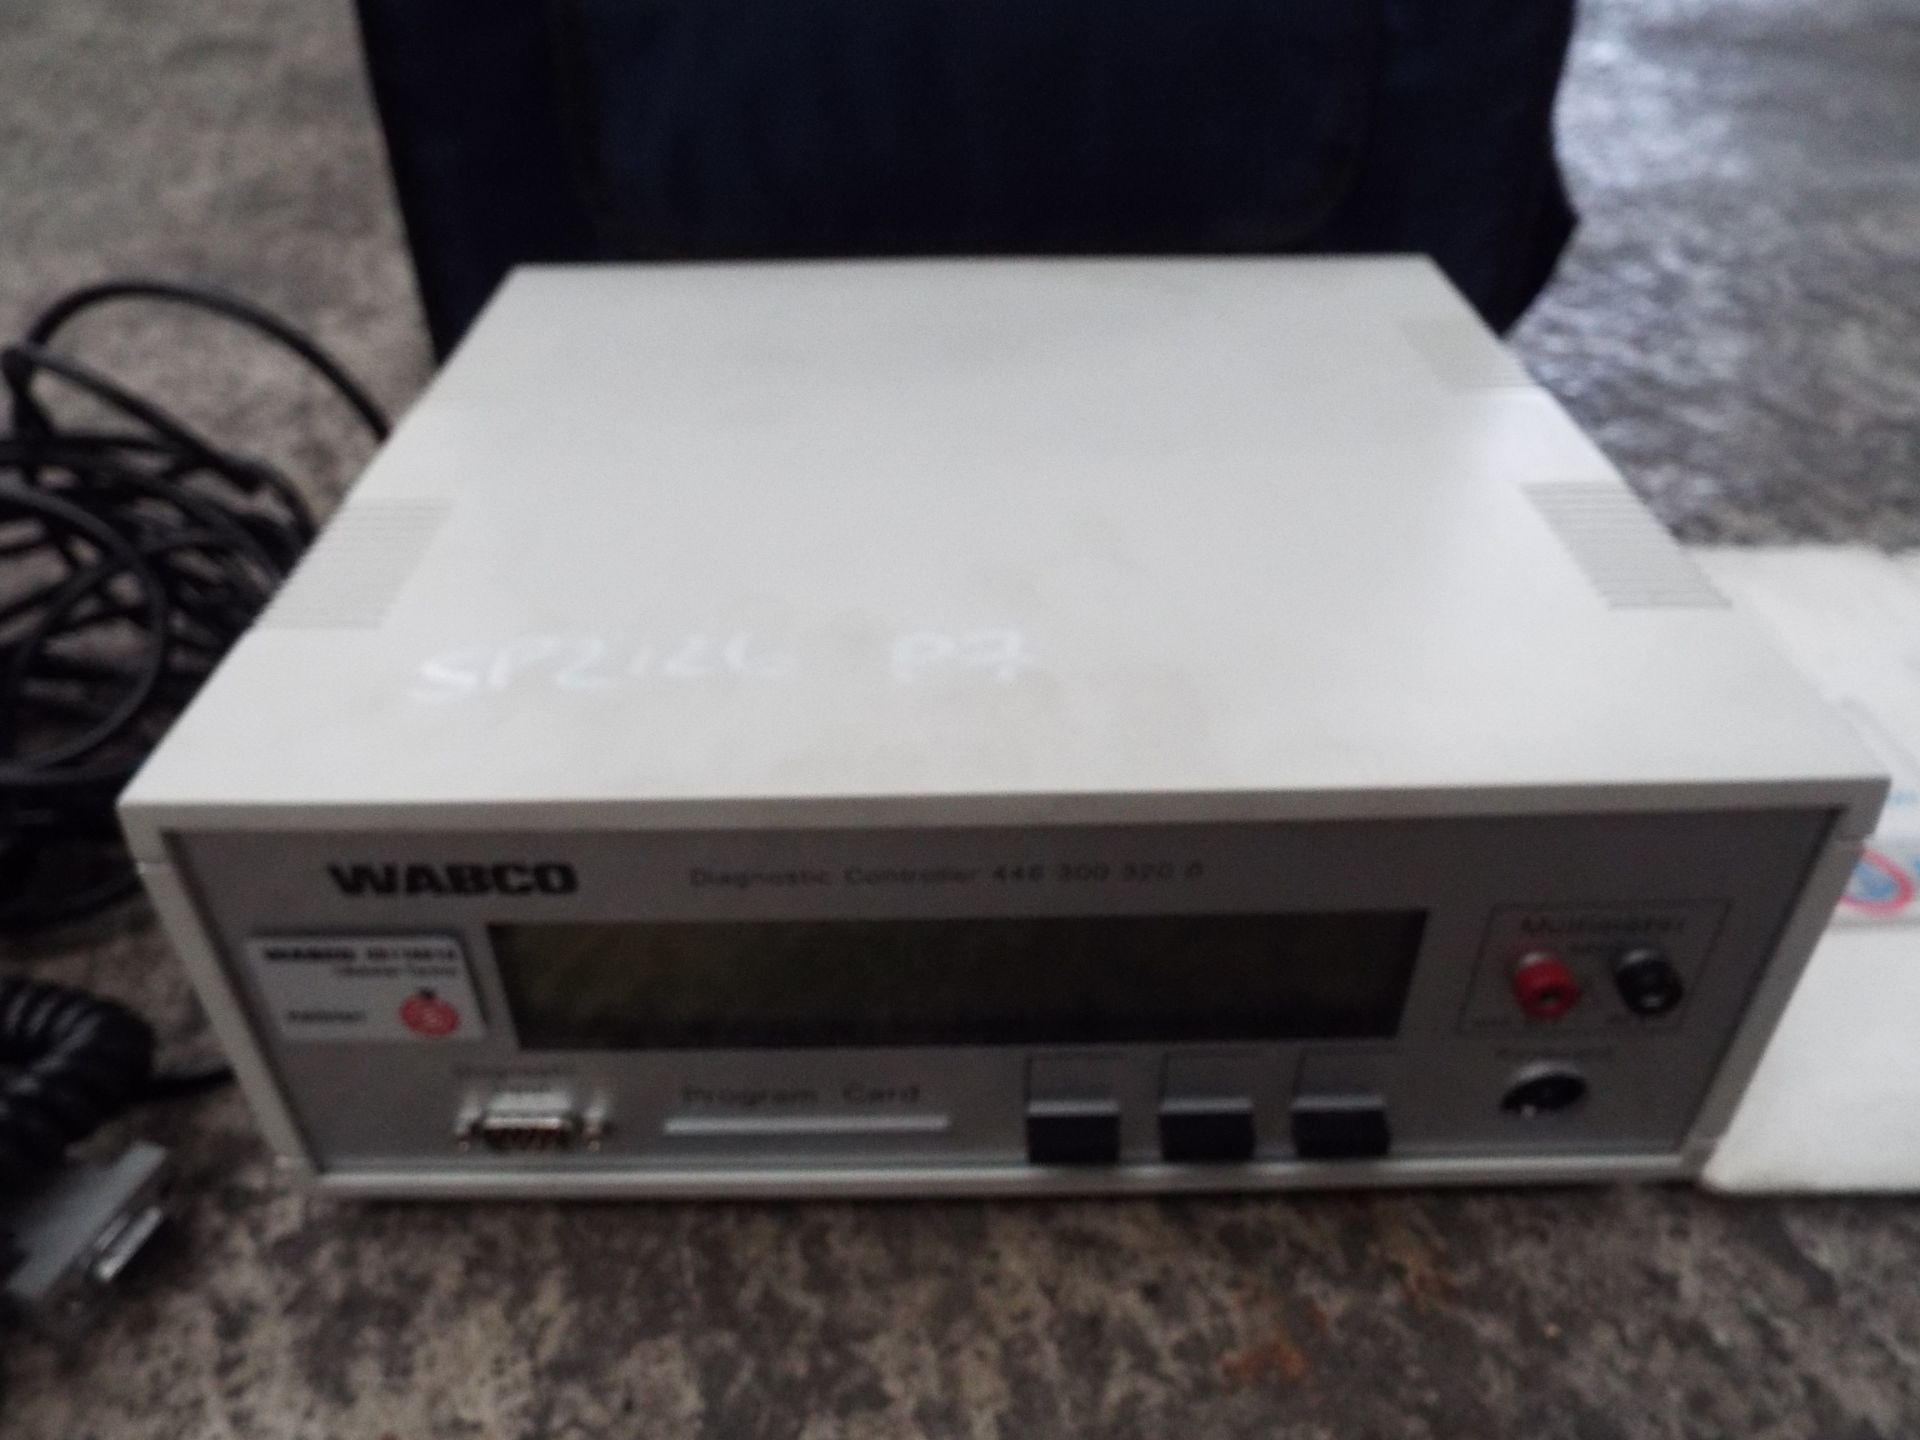 Wabco ABS Diagnostic Kit - Image 2 of 6